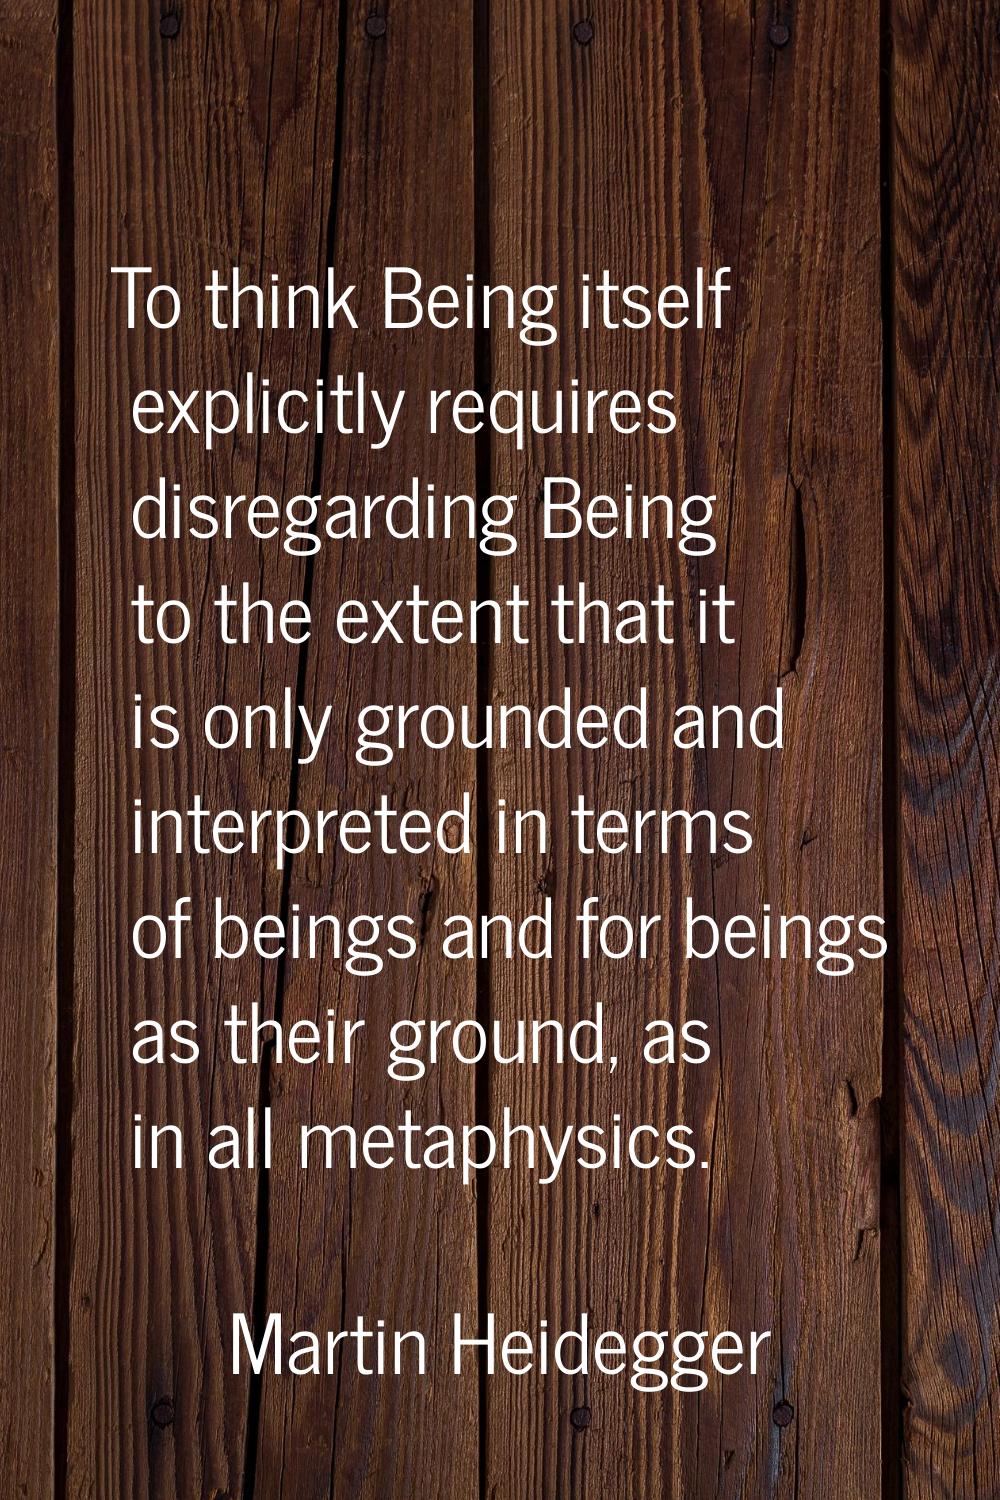 To think Being itself explicitly requires disregarding Being to the extent that it is only grounded